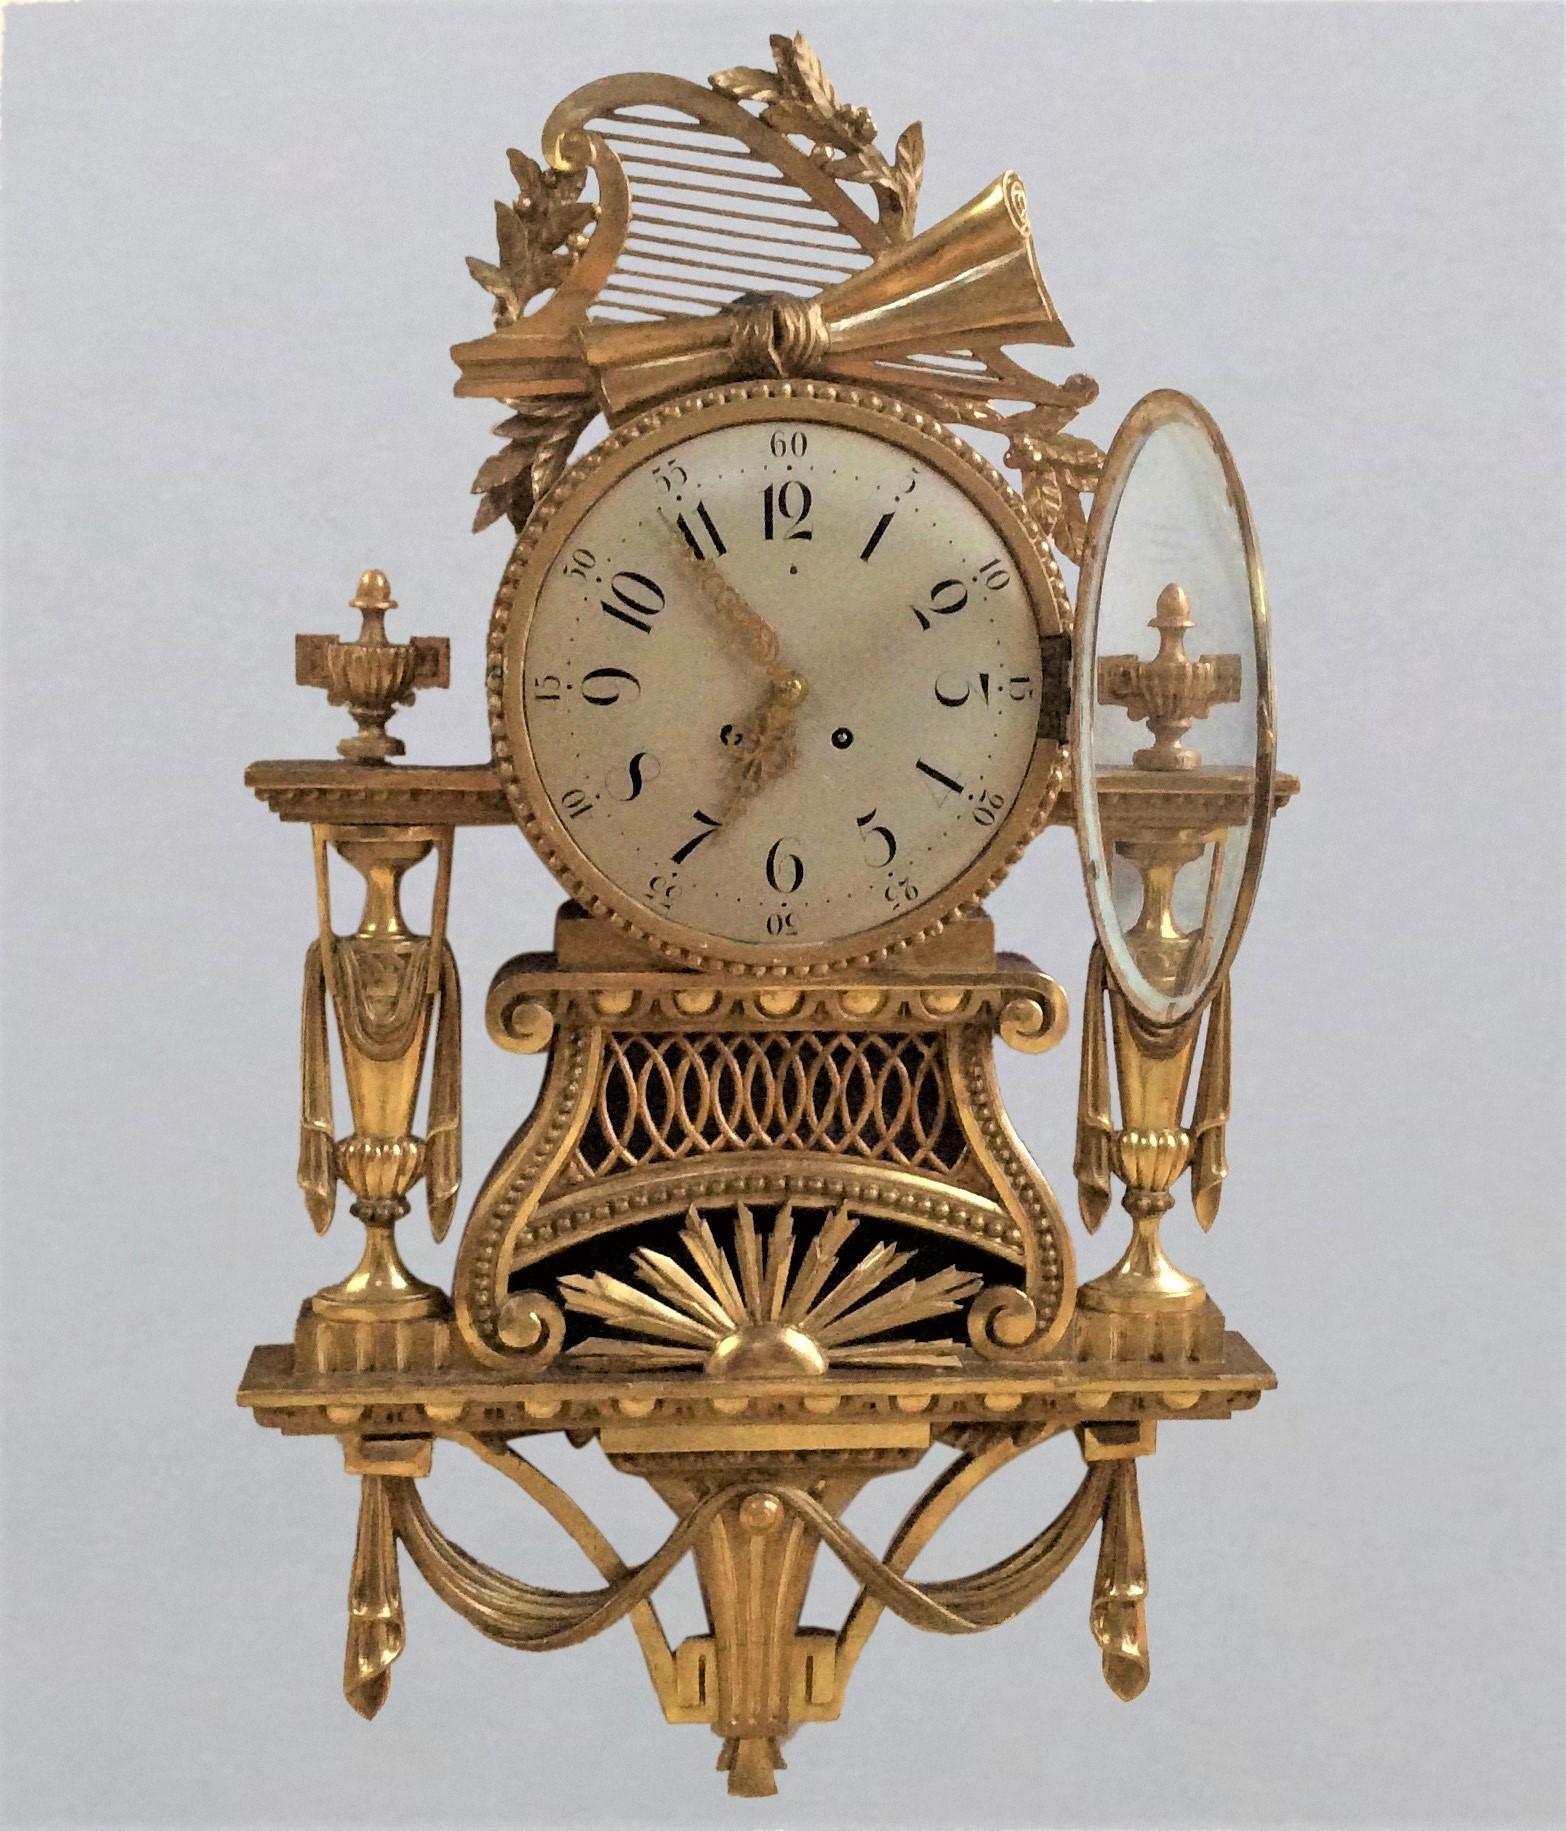 Gilt wood cartel clock.


Painted dial with Roman numerals and pierced gilt hands. 

 Giltwood case with swag decoration, turned finials, surmounted by a harp with starburst decoration below the dial.

Eight day movement by Gustav Becker with